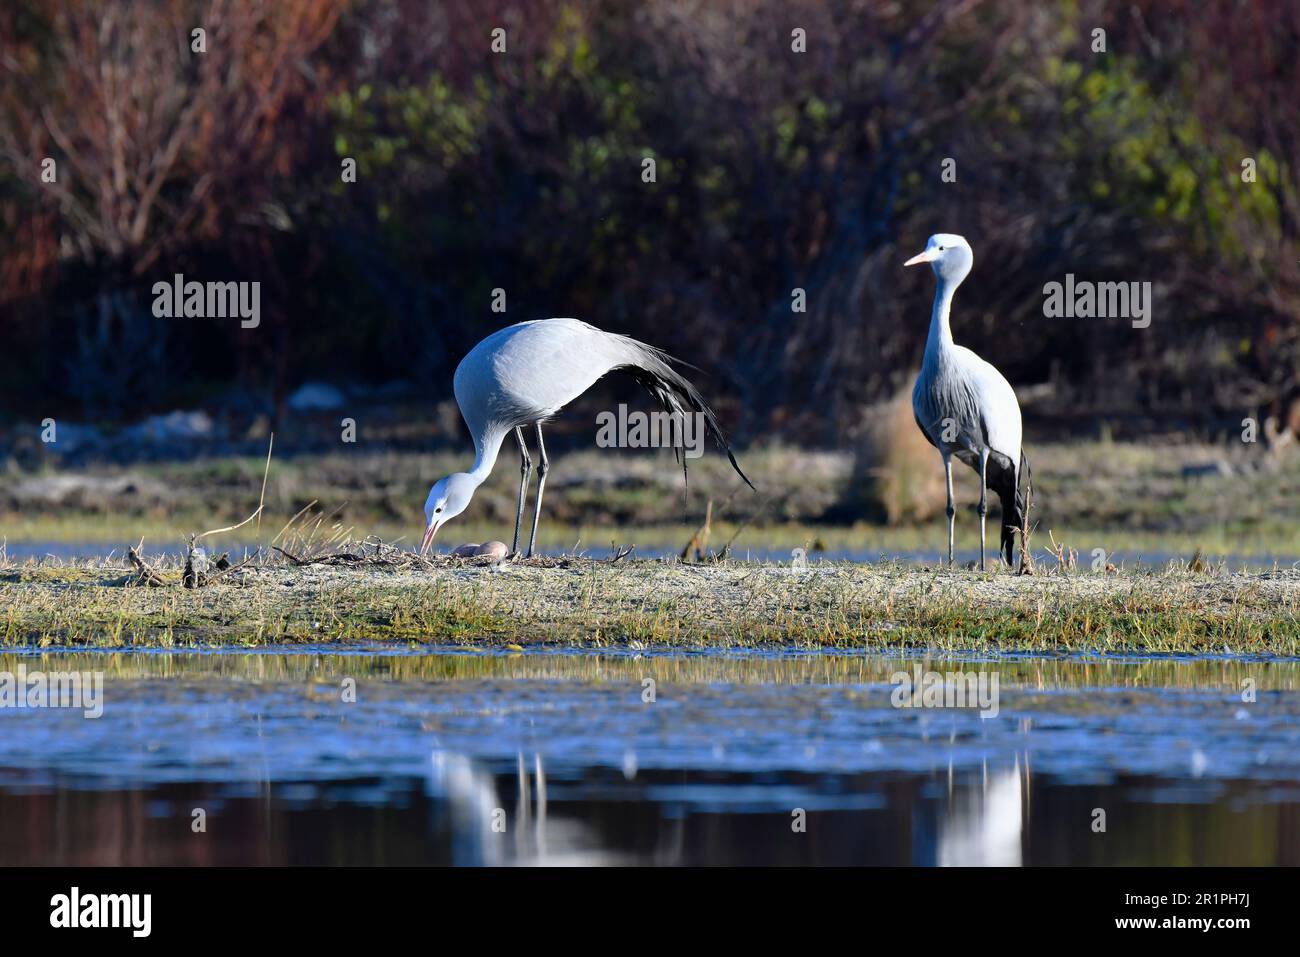 Blue Cranes [Anthropoides paradiseus] at their nesting site in the Bot River wetland, Overberg, South Africa. Stock Photo